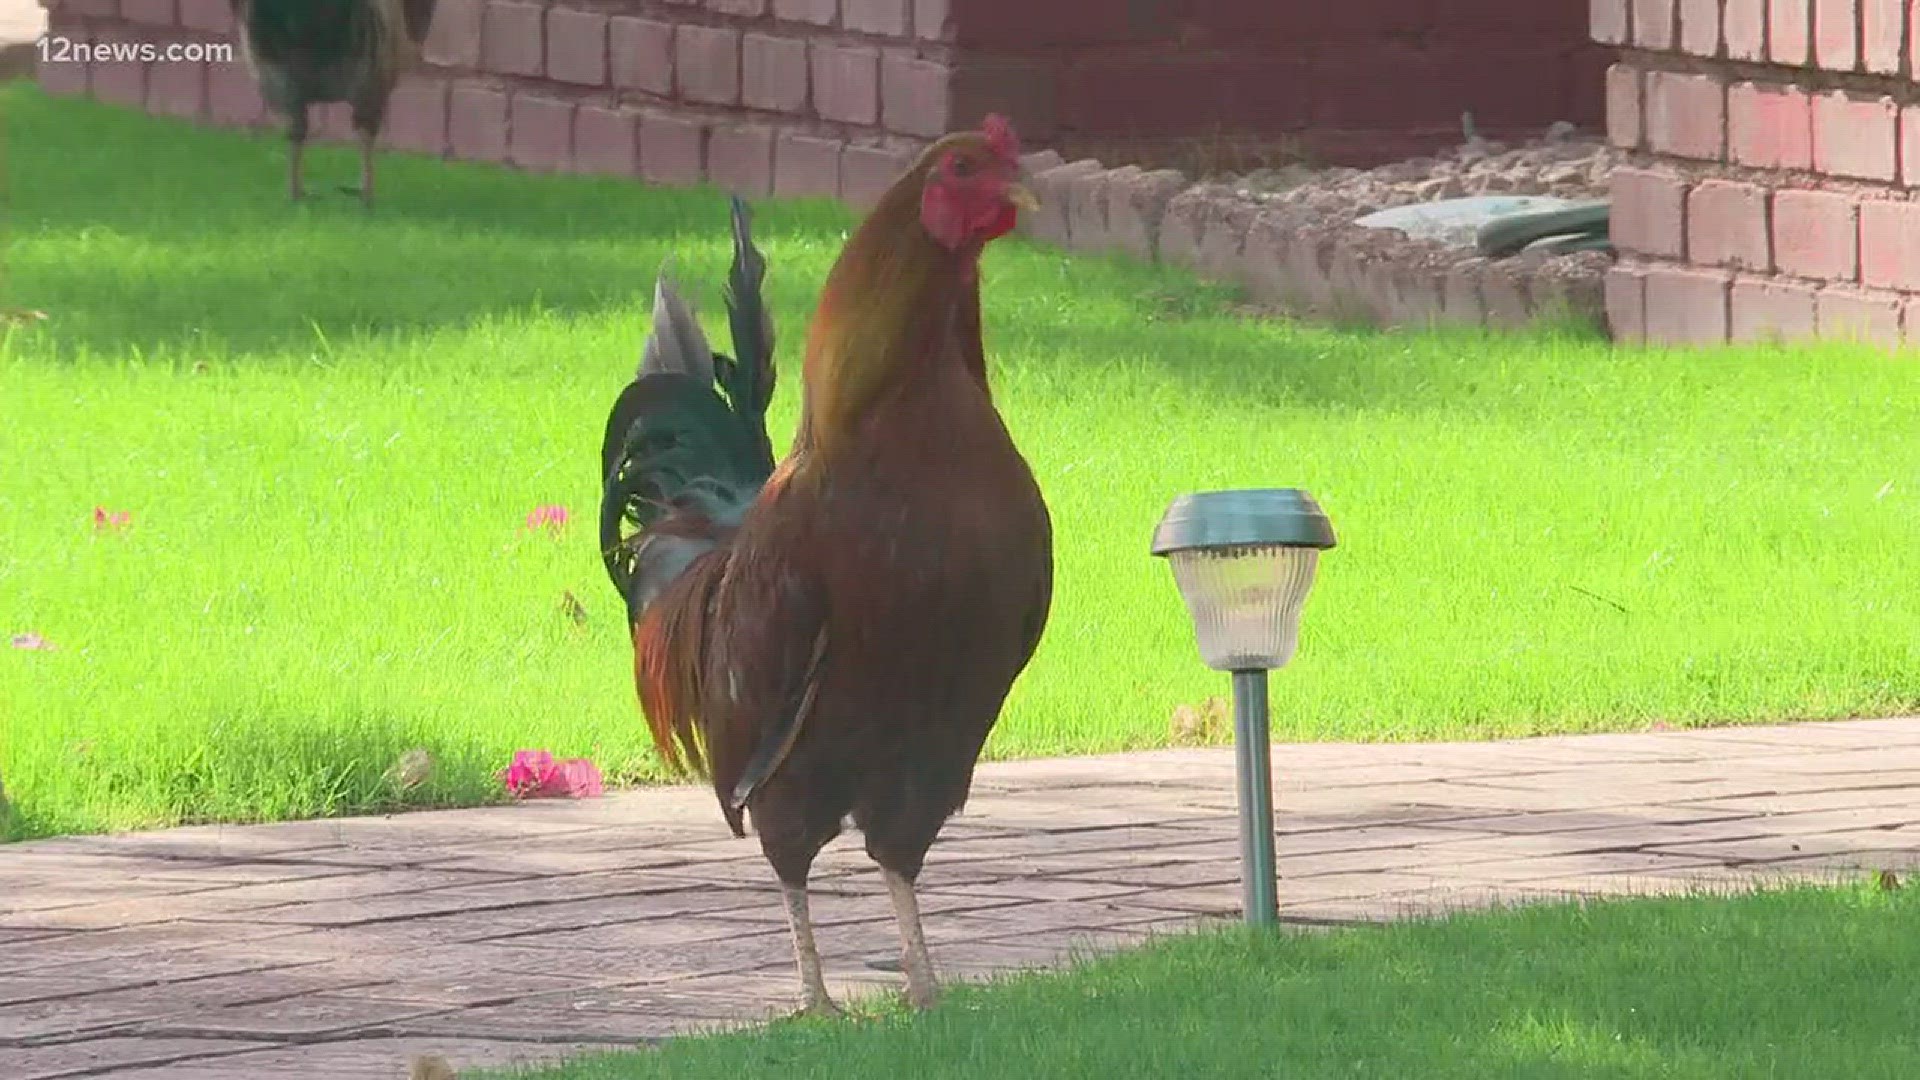 Neighbors boiling over as free-range chickens flock and multiply in one Phoenix residence area.